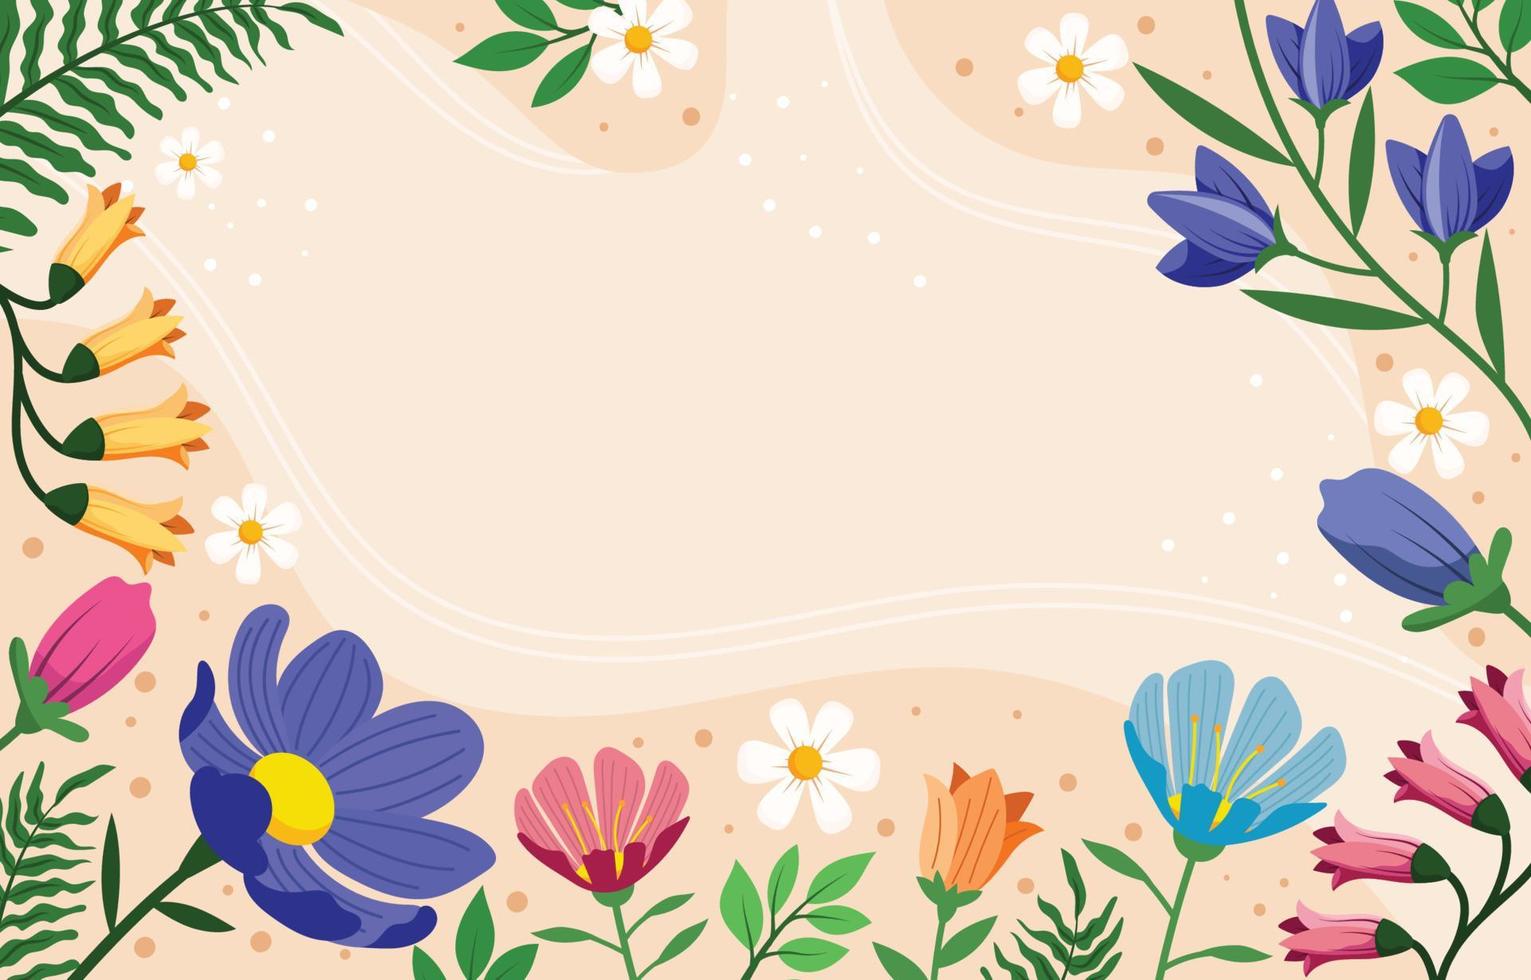 Spring Floral and Foliage Concept vector